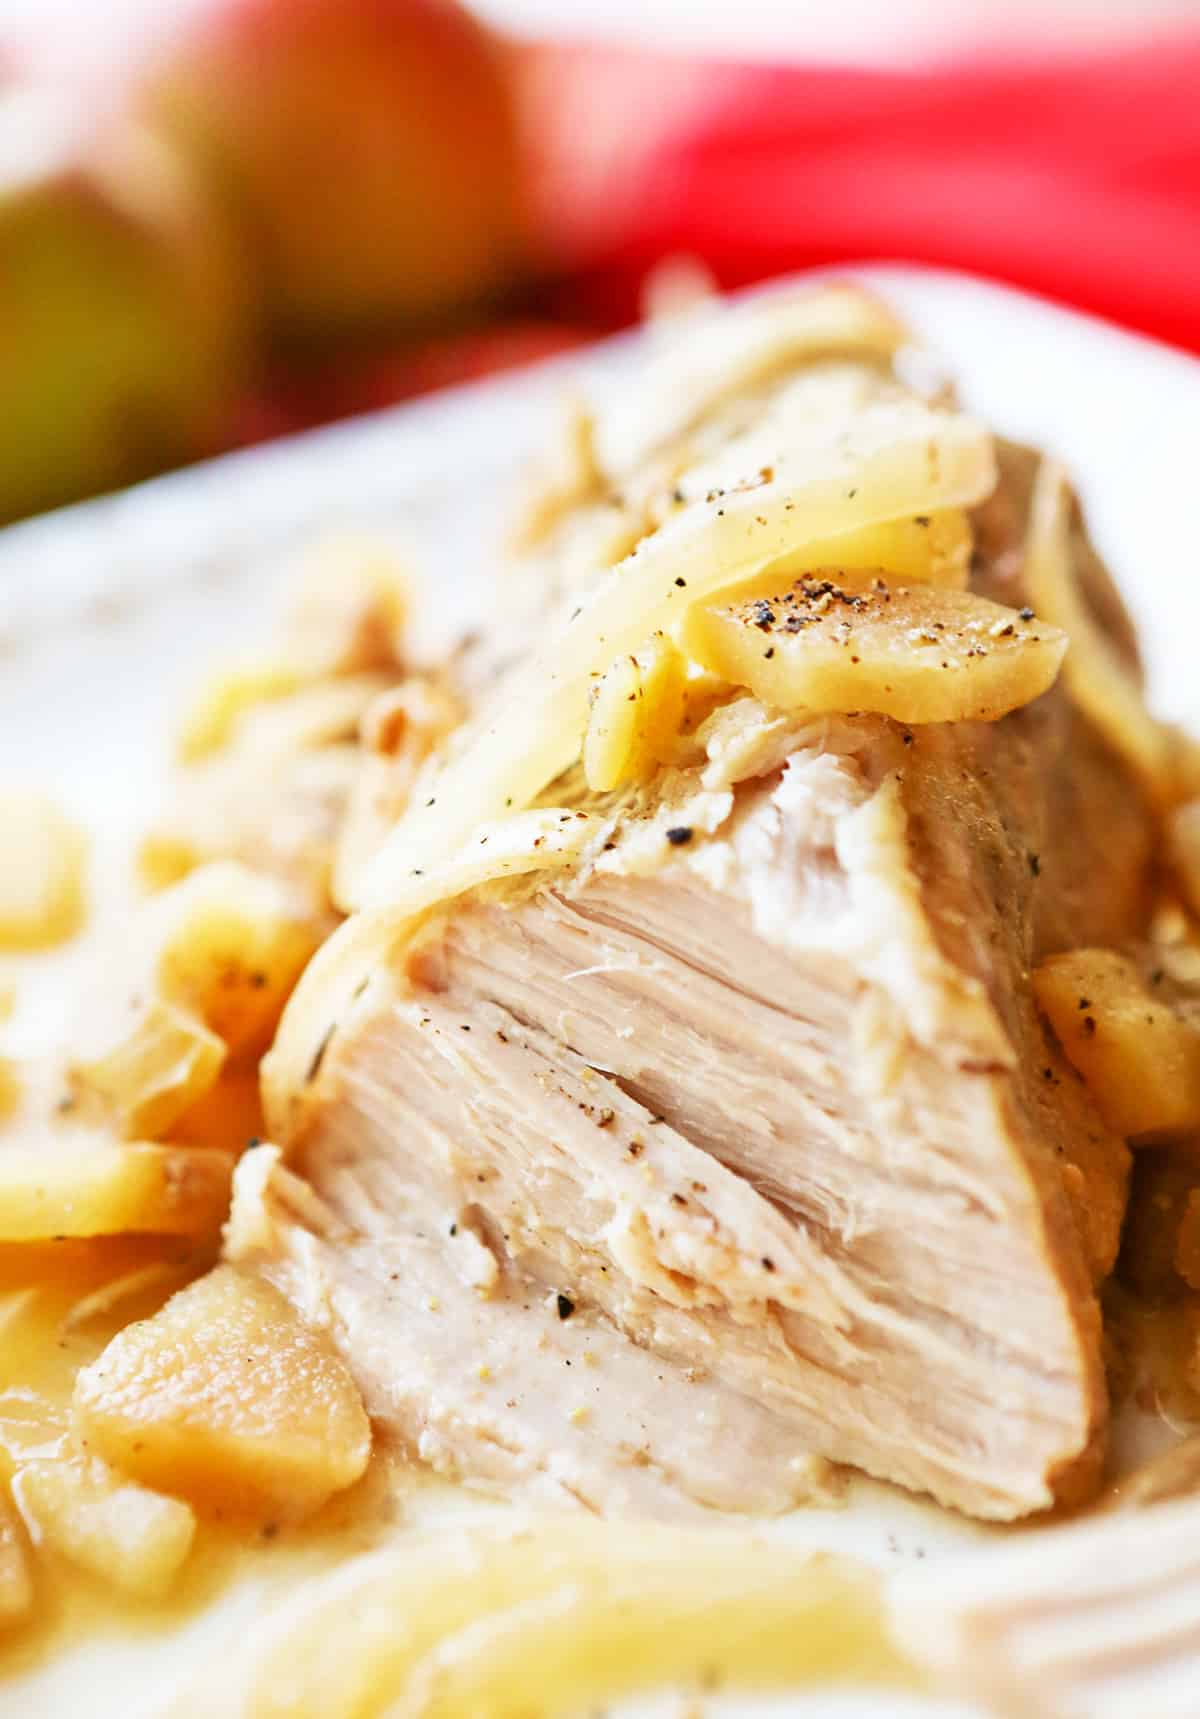 Pork tenderloin with juicy center meat exposed and cooked apples on top.